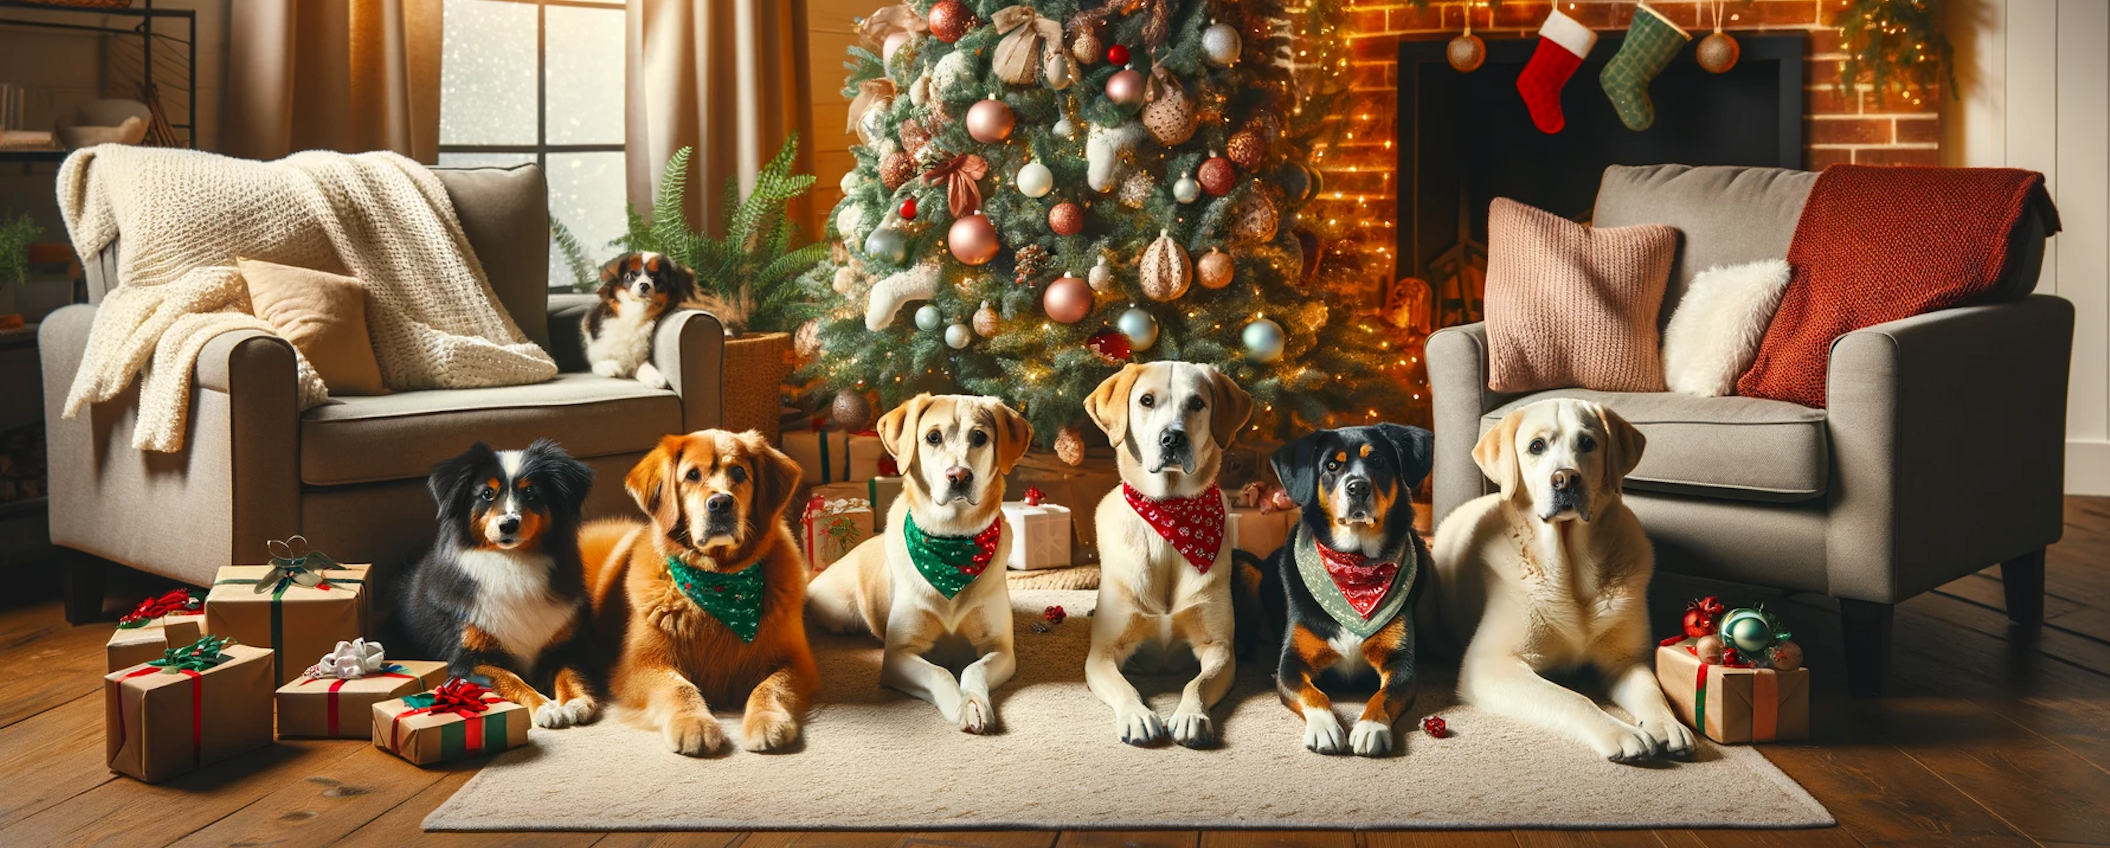 dogs by a Christmas tree getting ready for the holiday season